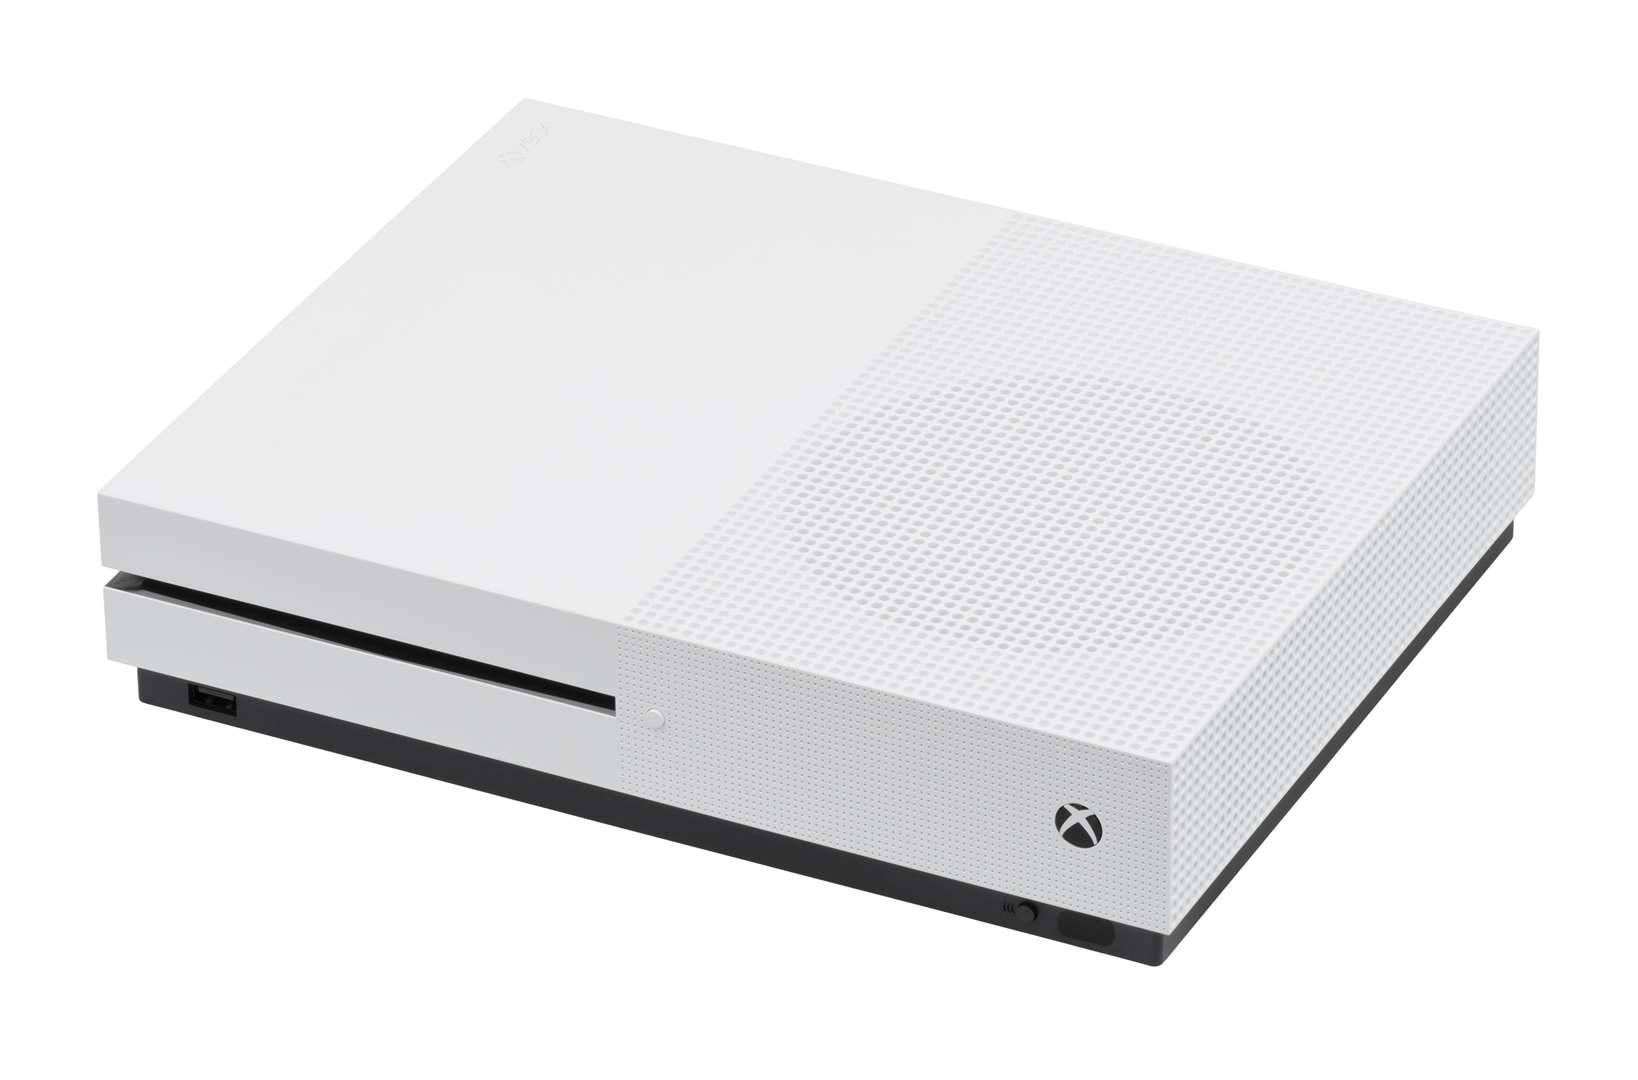 An Xbox One S was stolen in the break-in at Westgate-on-Sea (10033012)